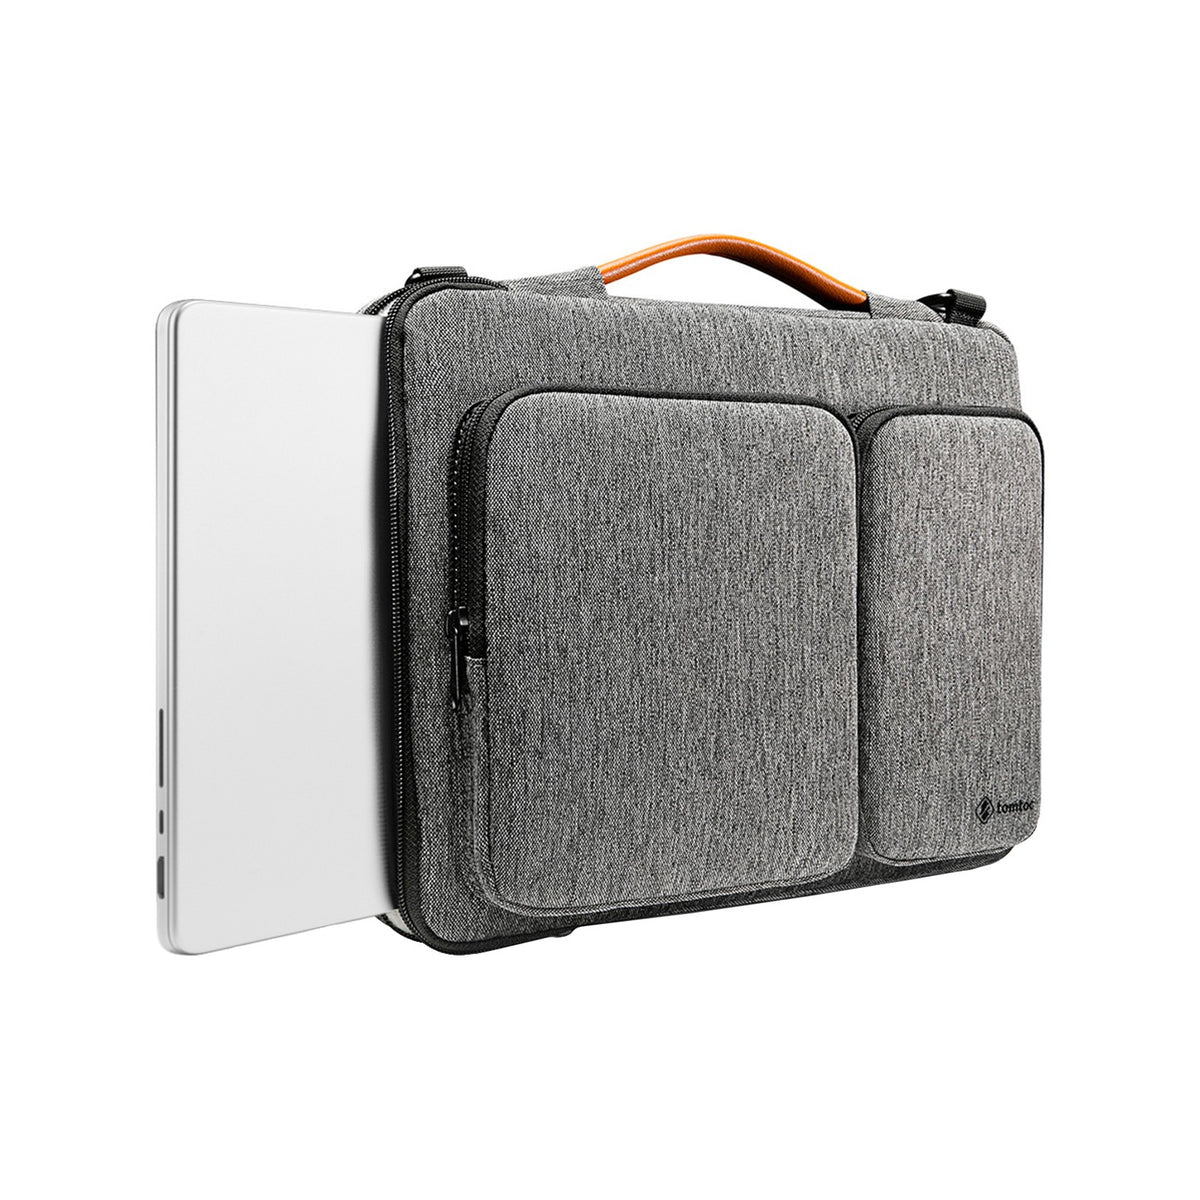 secondary_Defender-A42 Laptop Briefcase For 14-inch MacBook Pro | Gray